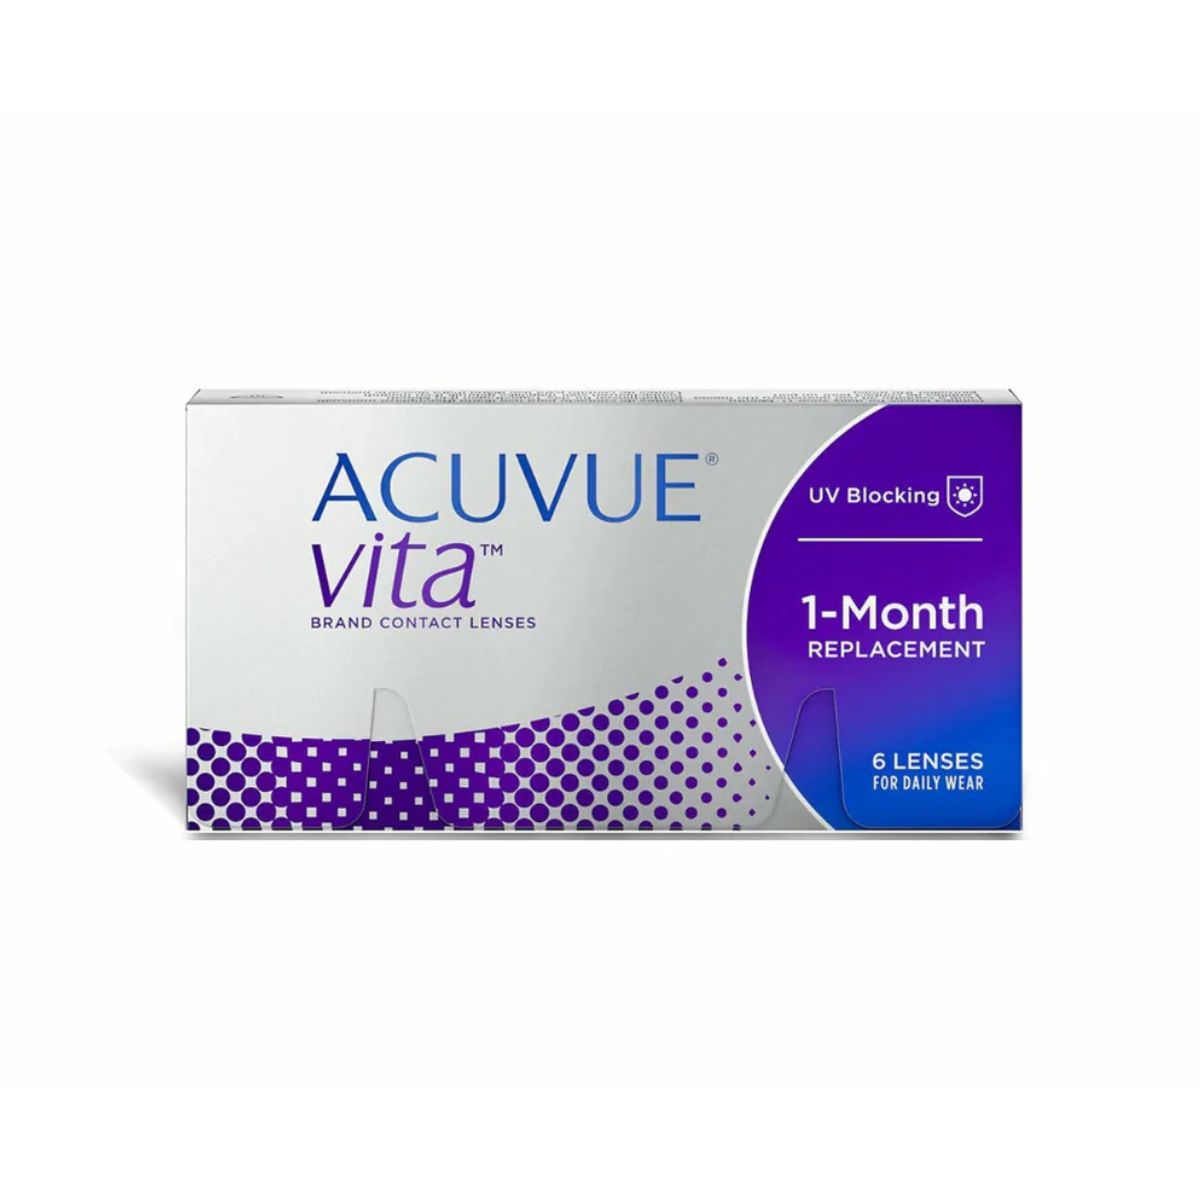 "Buy ACUVUE® VITA® Contact Lenses - Enjoy Comfort and UV Protection optorium"